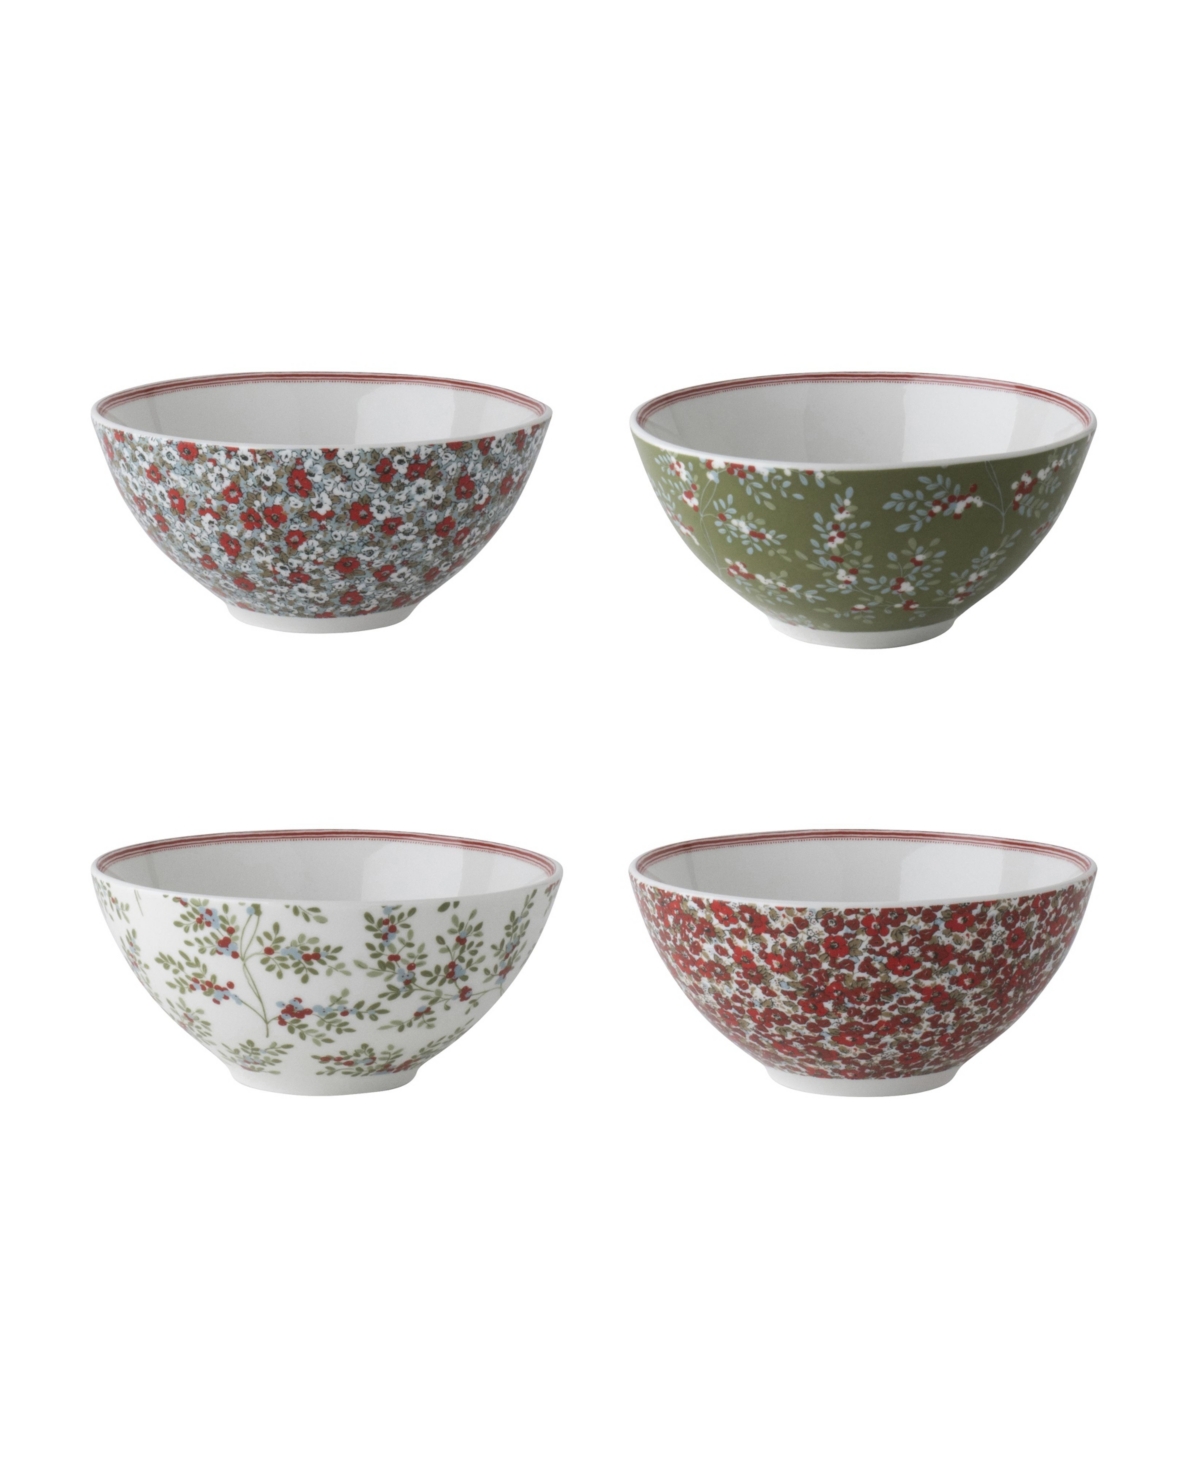 Laura Ashley Bowls Stockbridge Collectables Gift Set, 4 Piece In Mixed